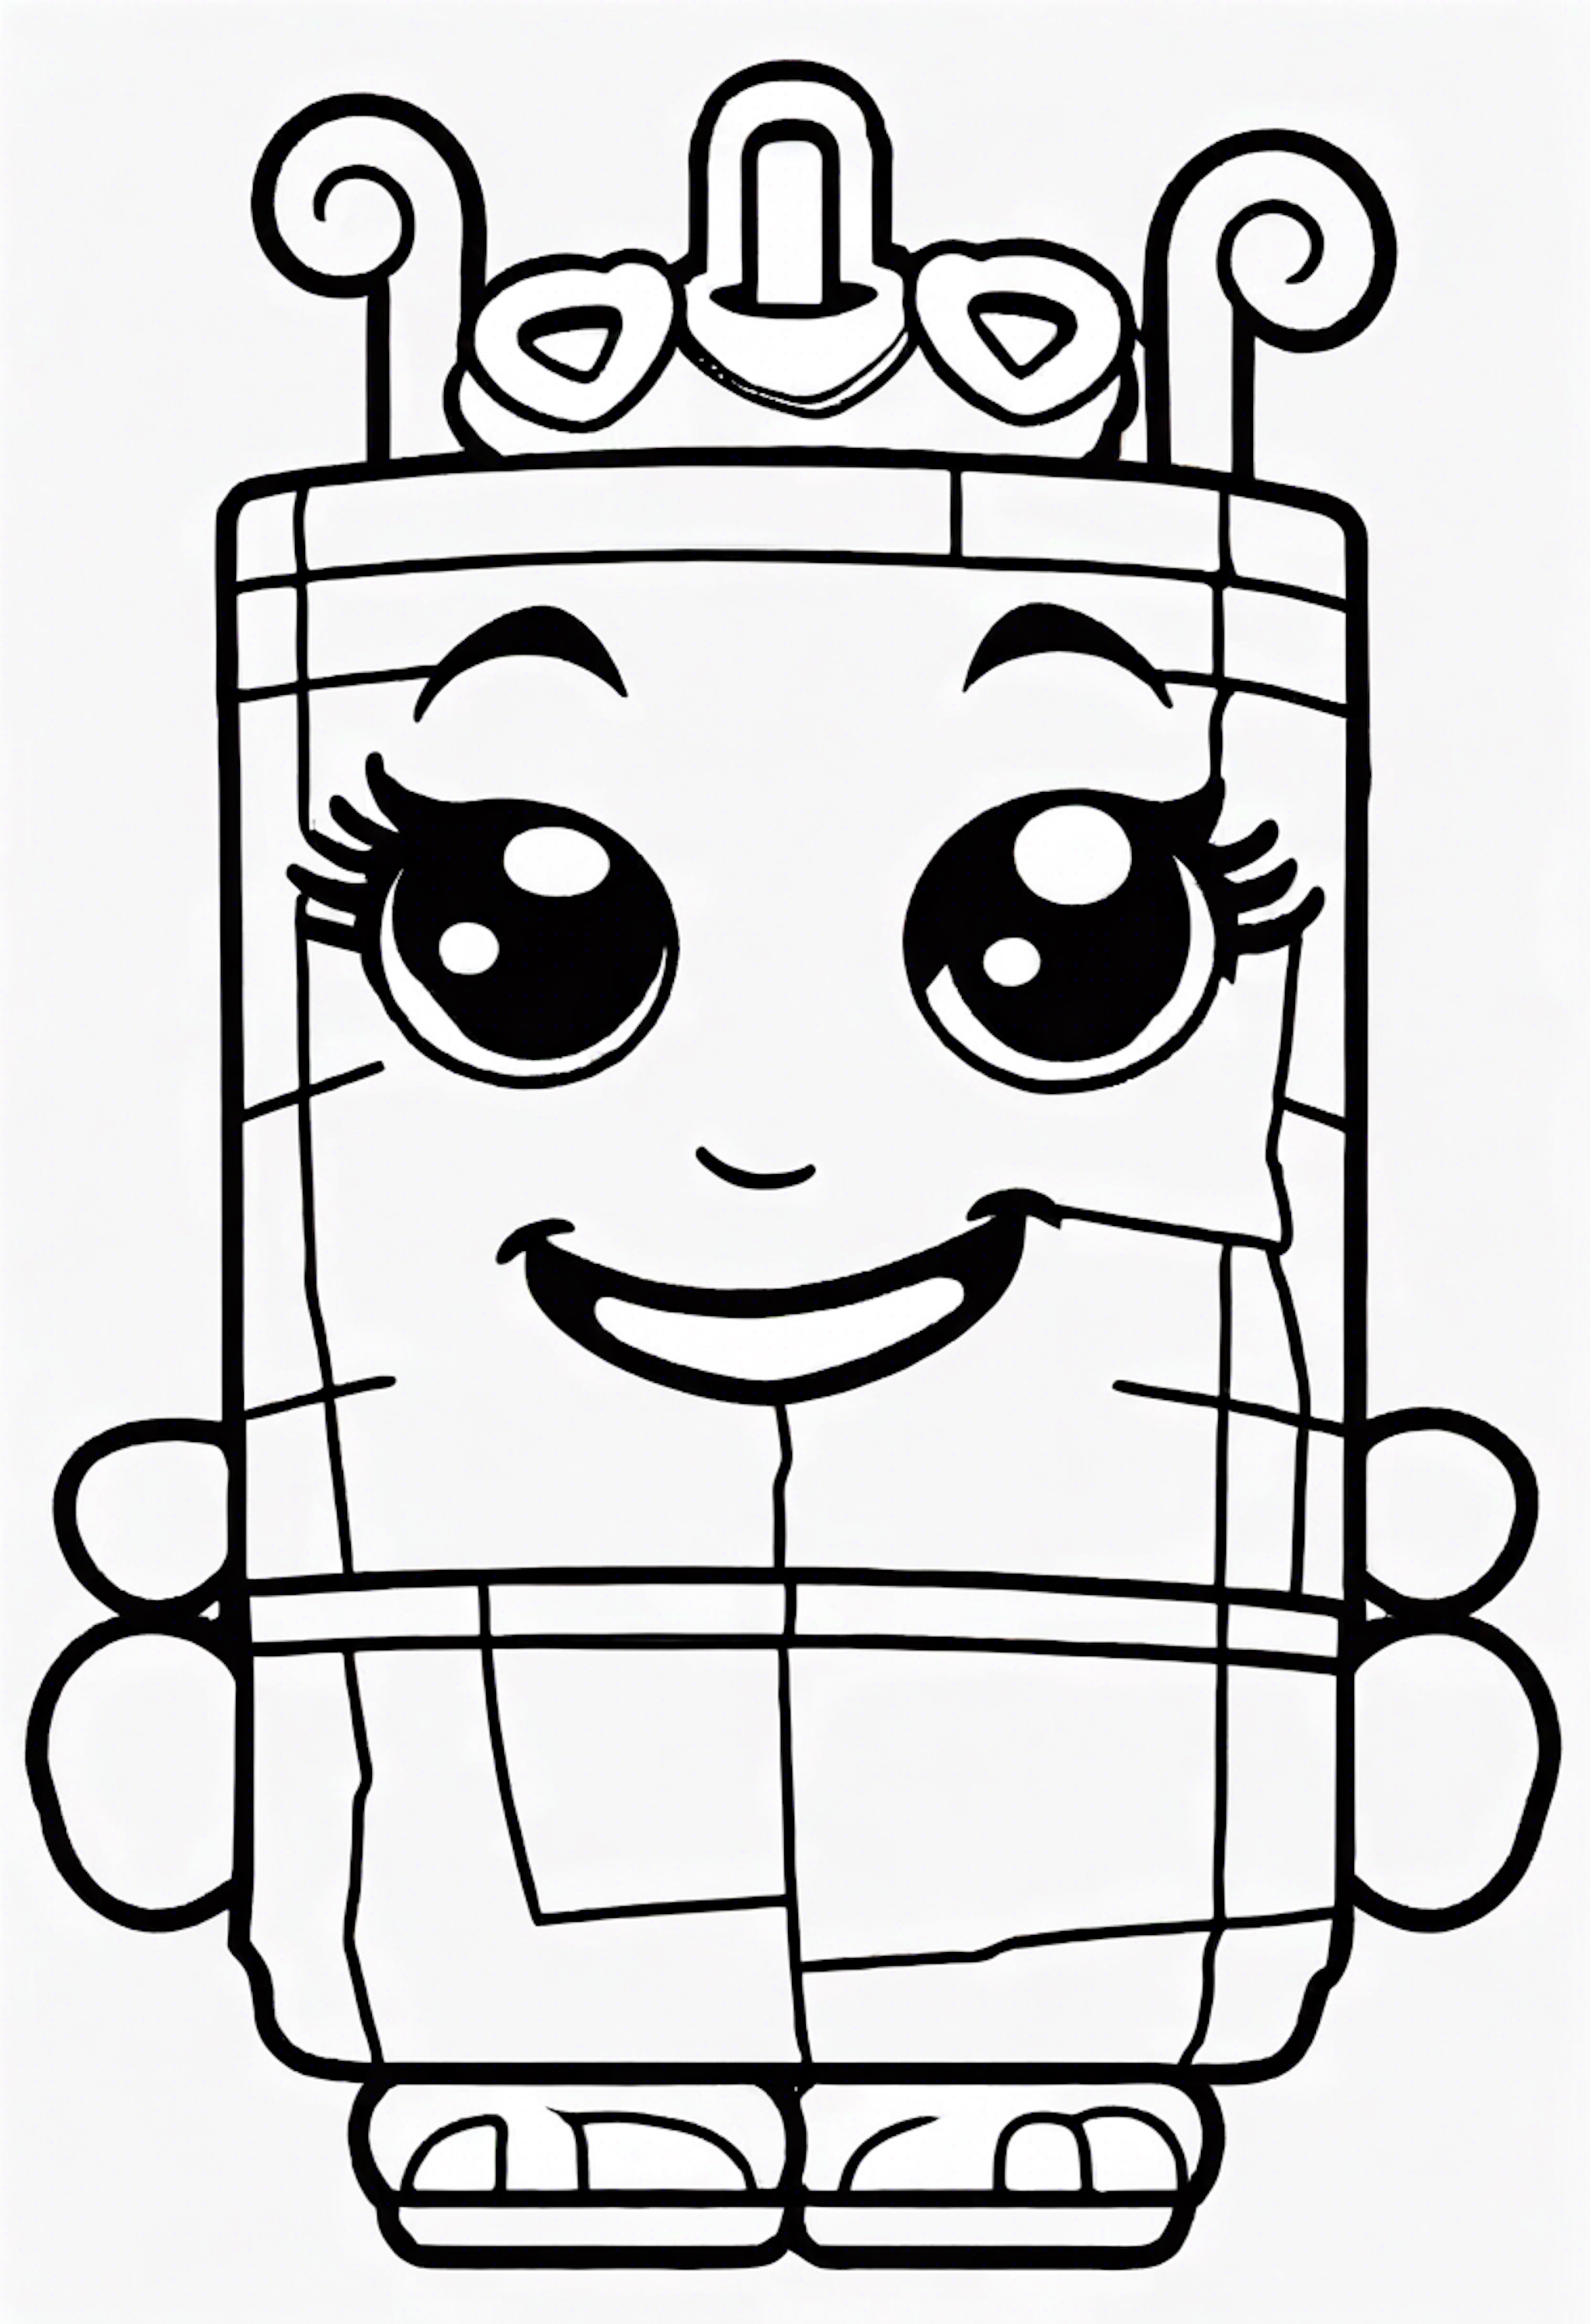 A coloring page for 1 Shopkins coloring pages